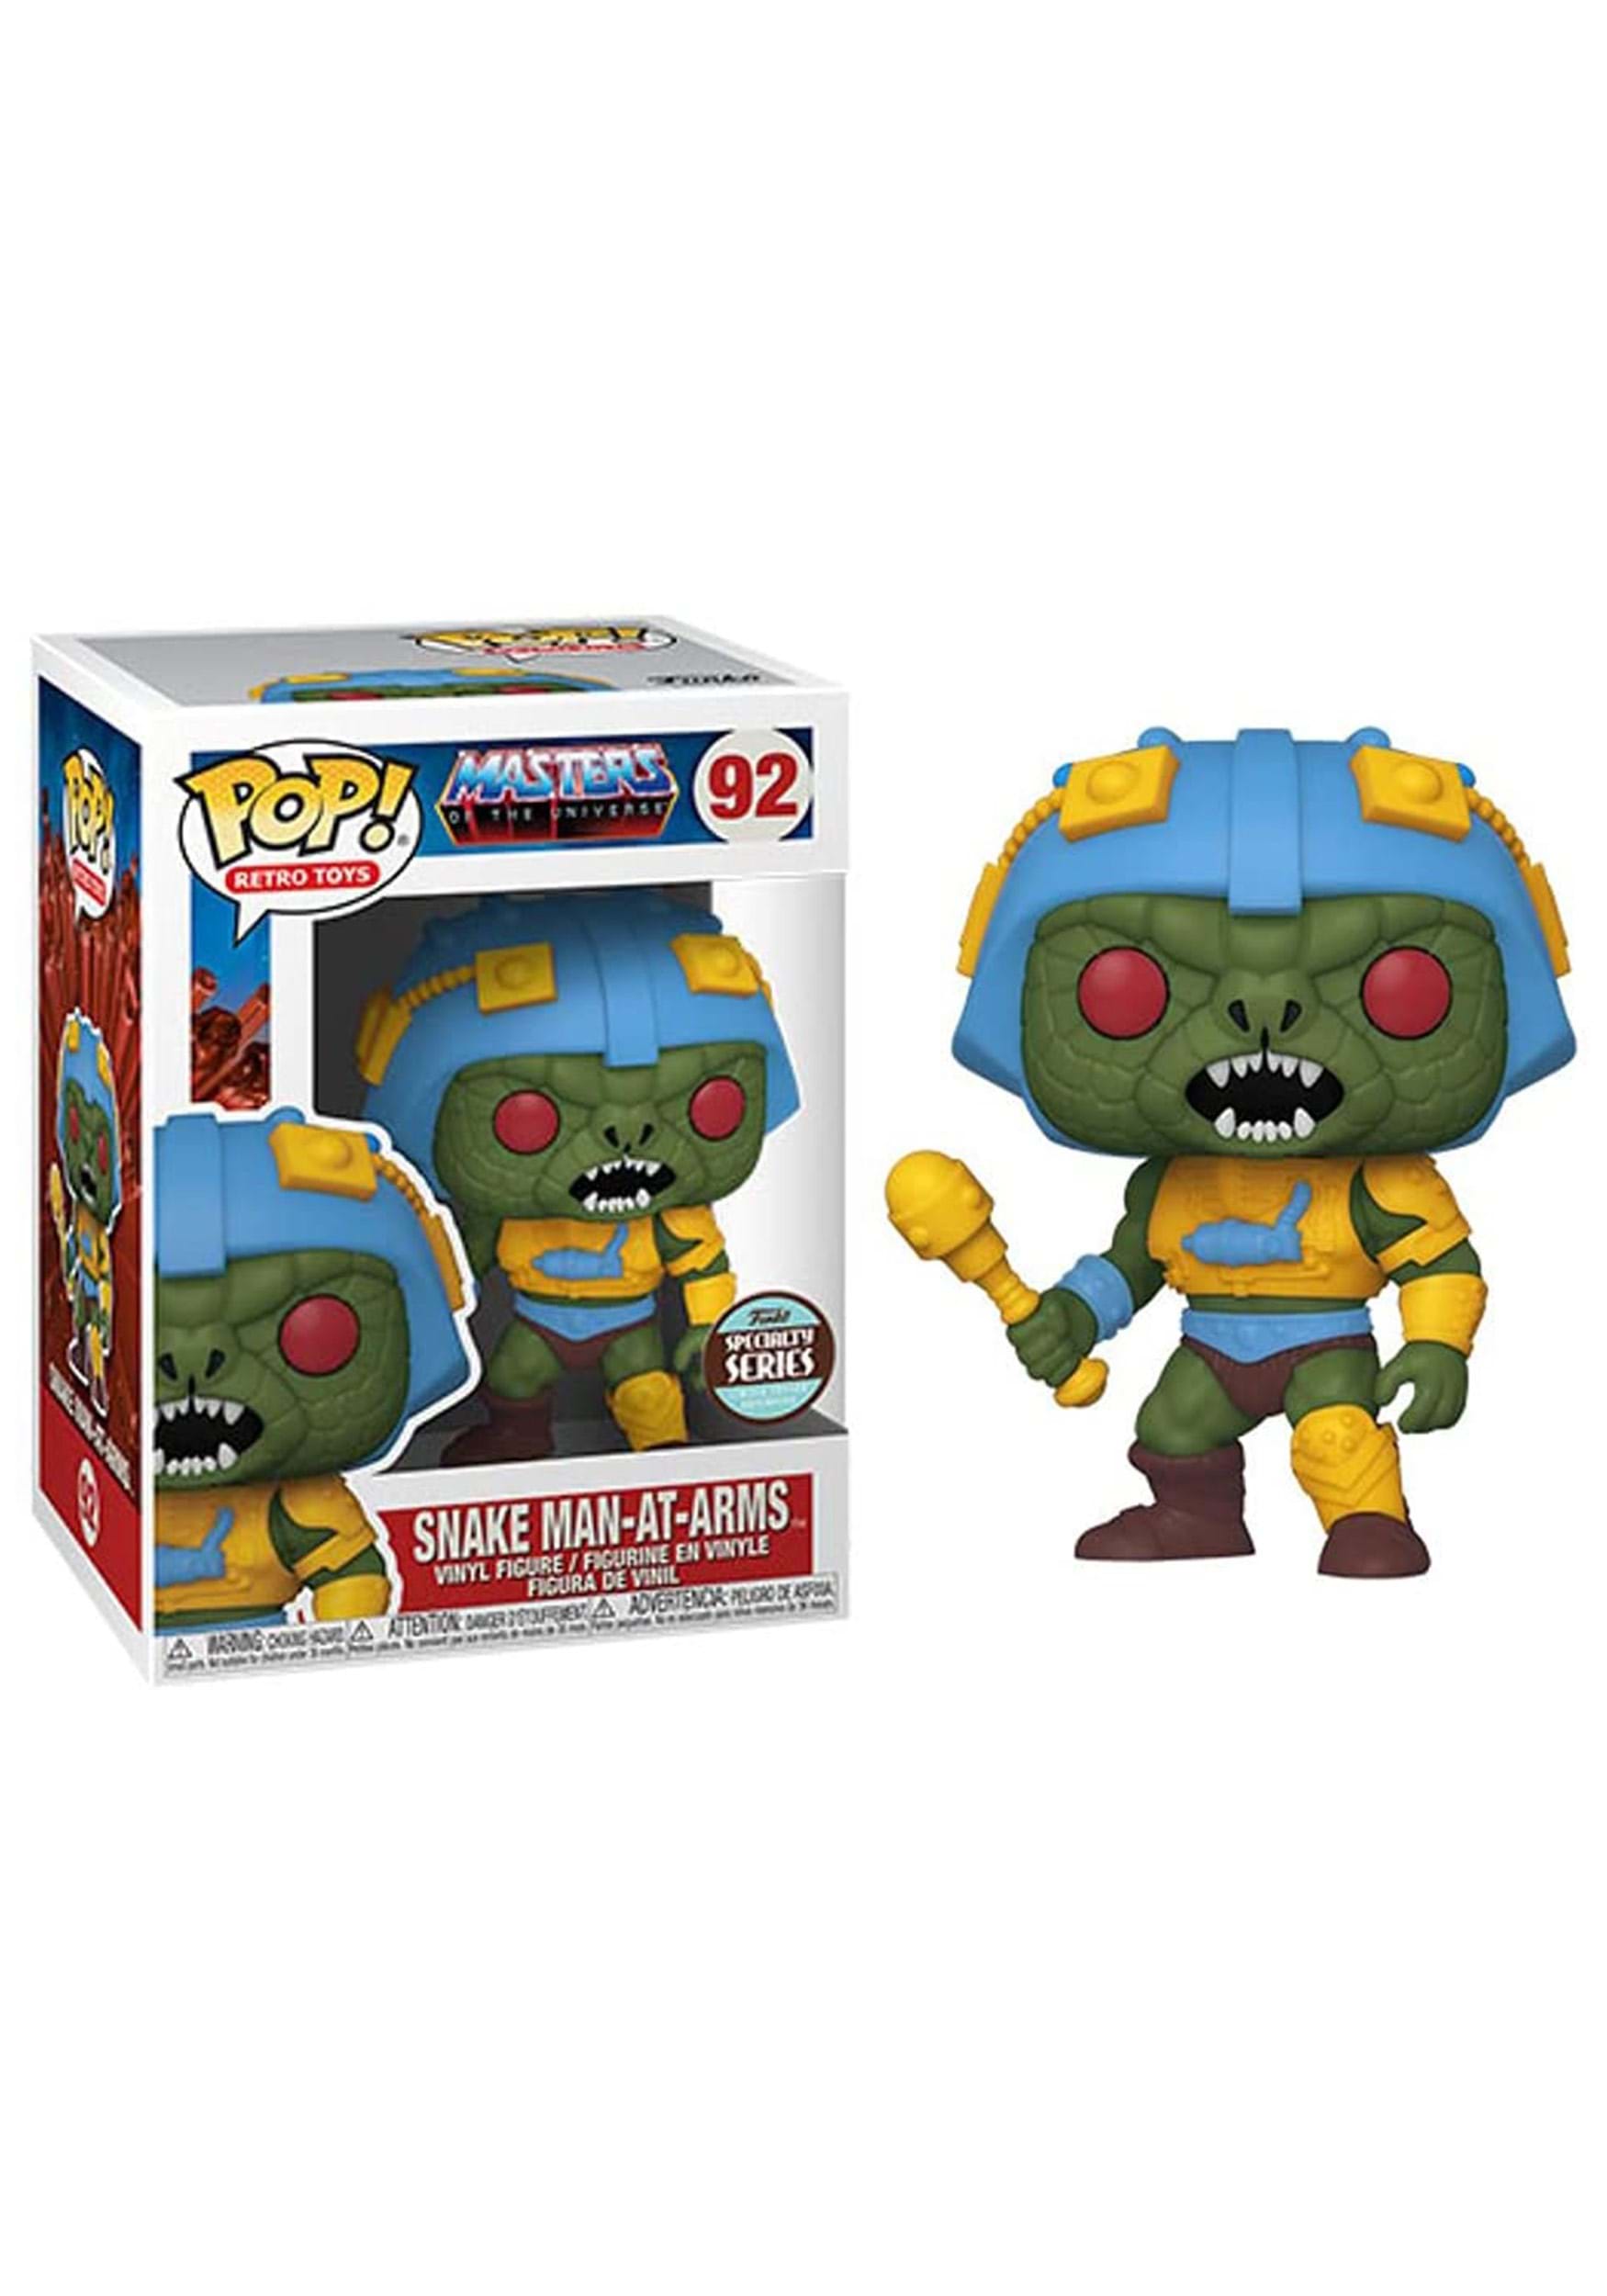 Funko POP! Vinyl: Masters of the Universe- Snake Man-At-Arms Speciality Series Figure